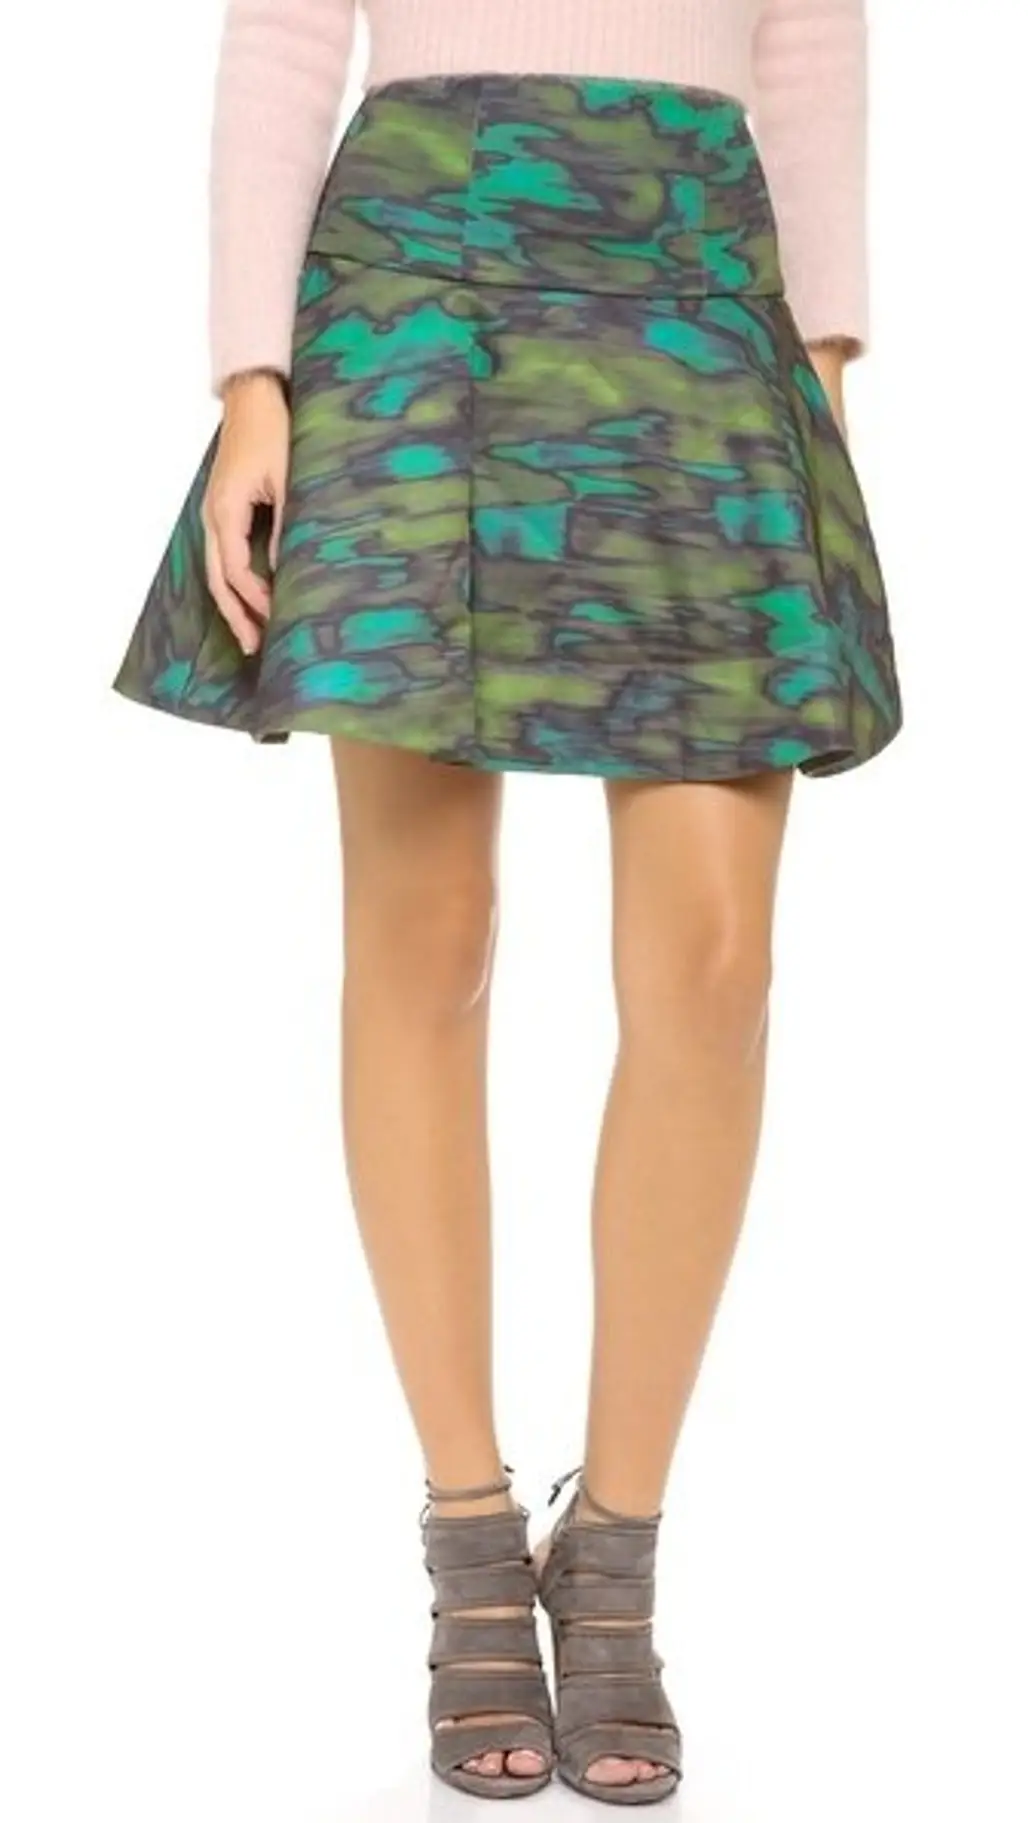 Nanette Lepore Outerspace Skirt